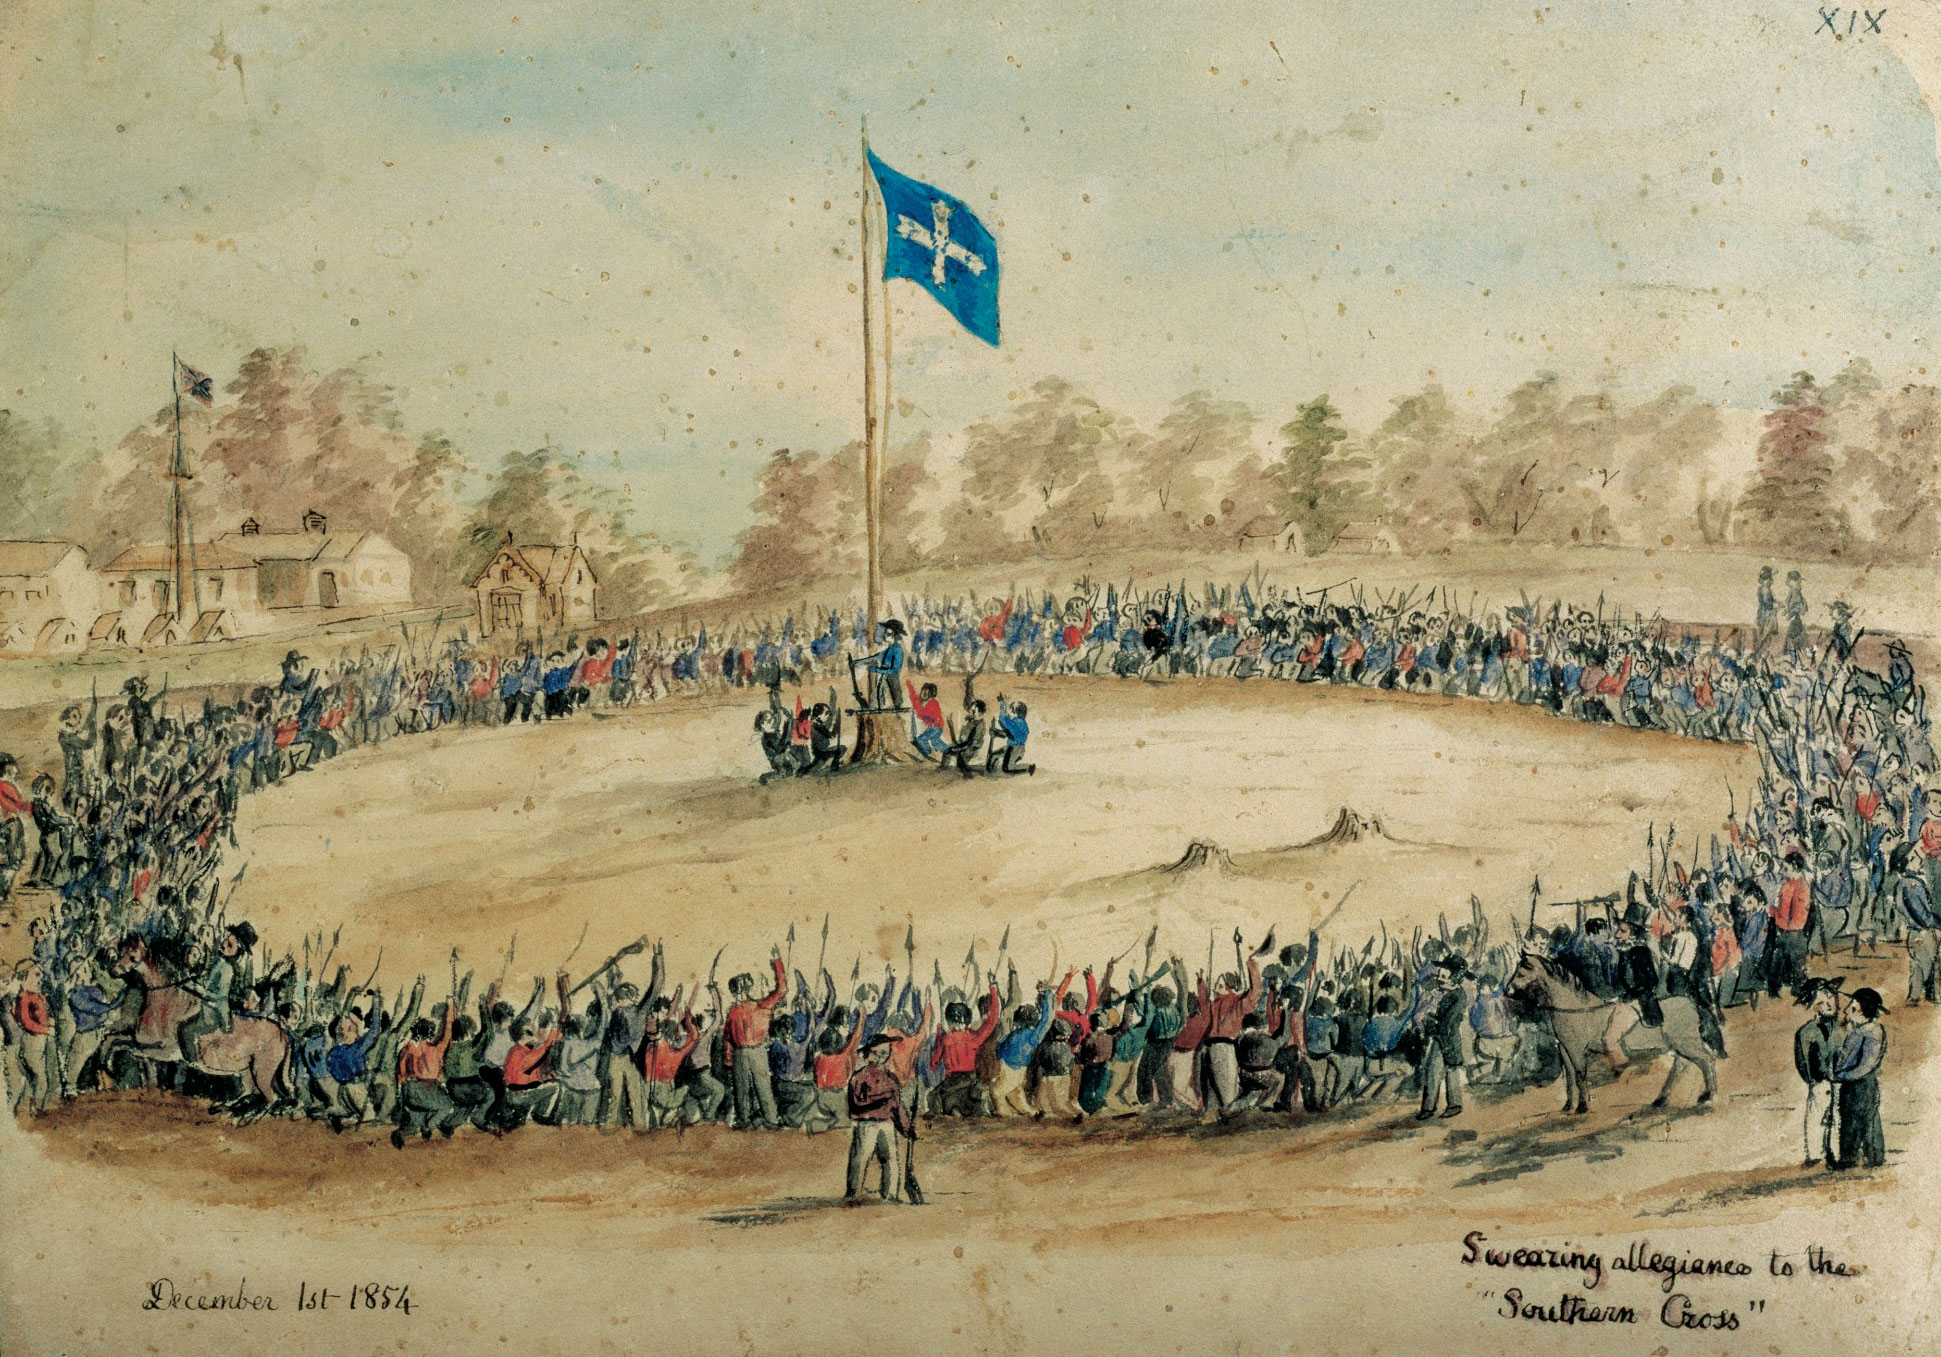 <p><em>Swearing Allegiance to the Southern Cross</em>, watercolour by Charles A Doudiet, 1 December 1854</p>
